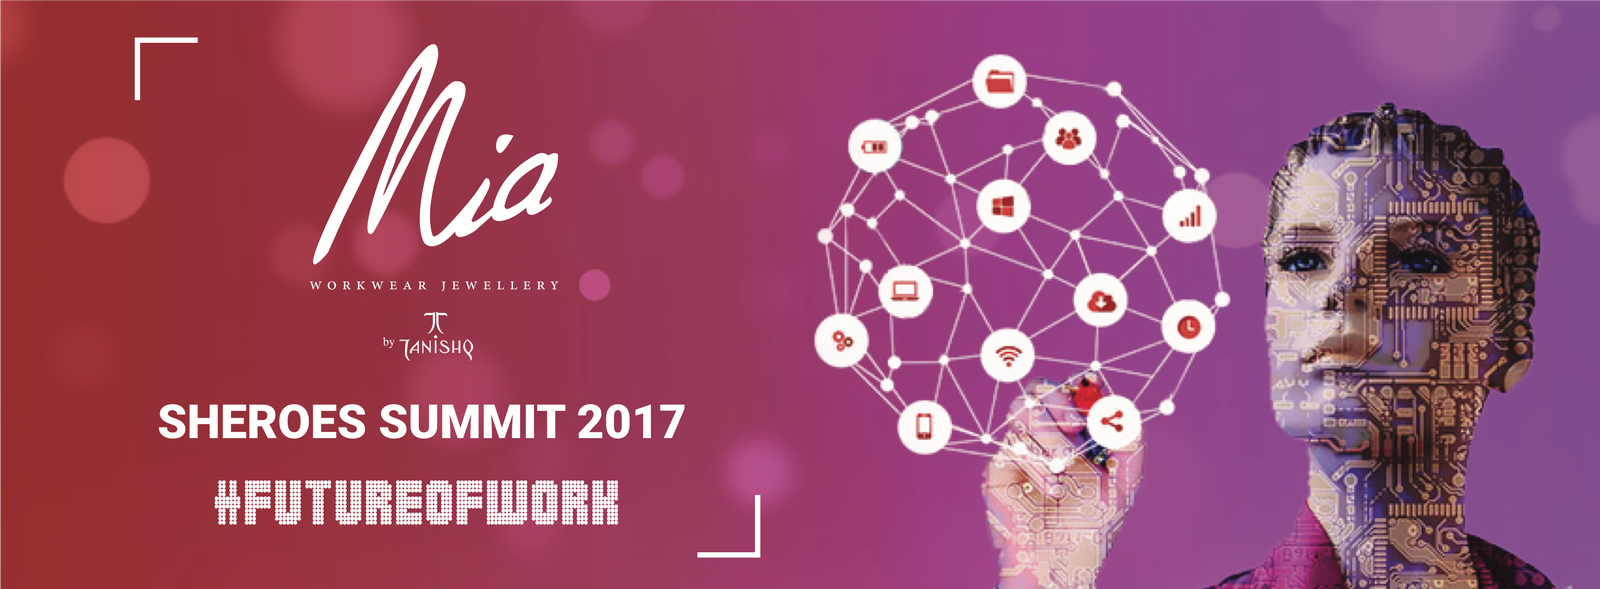 THE SHEROES SUMMIT 2017